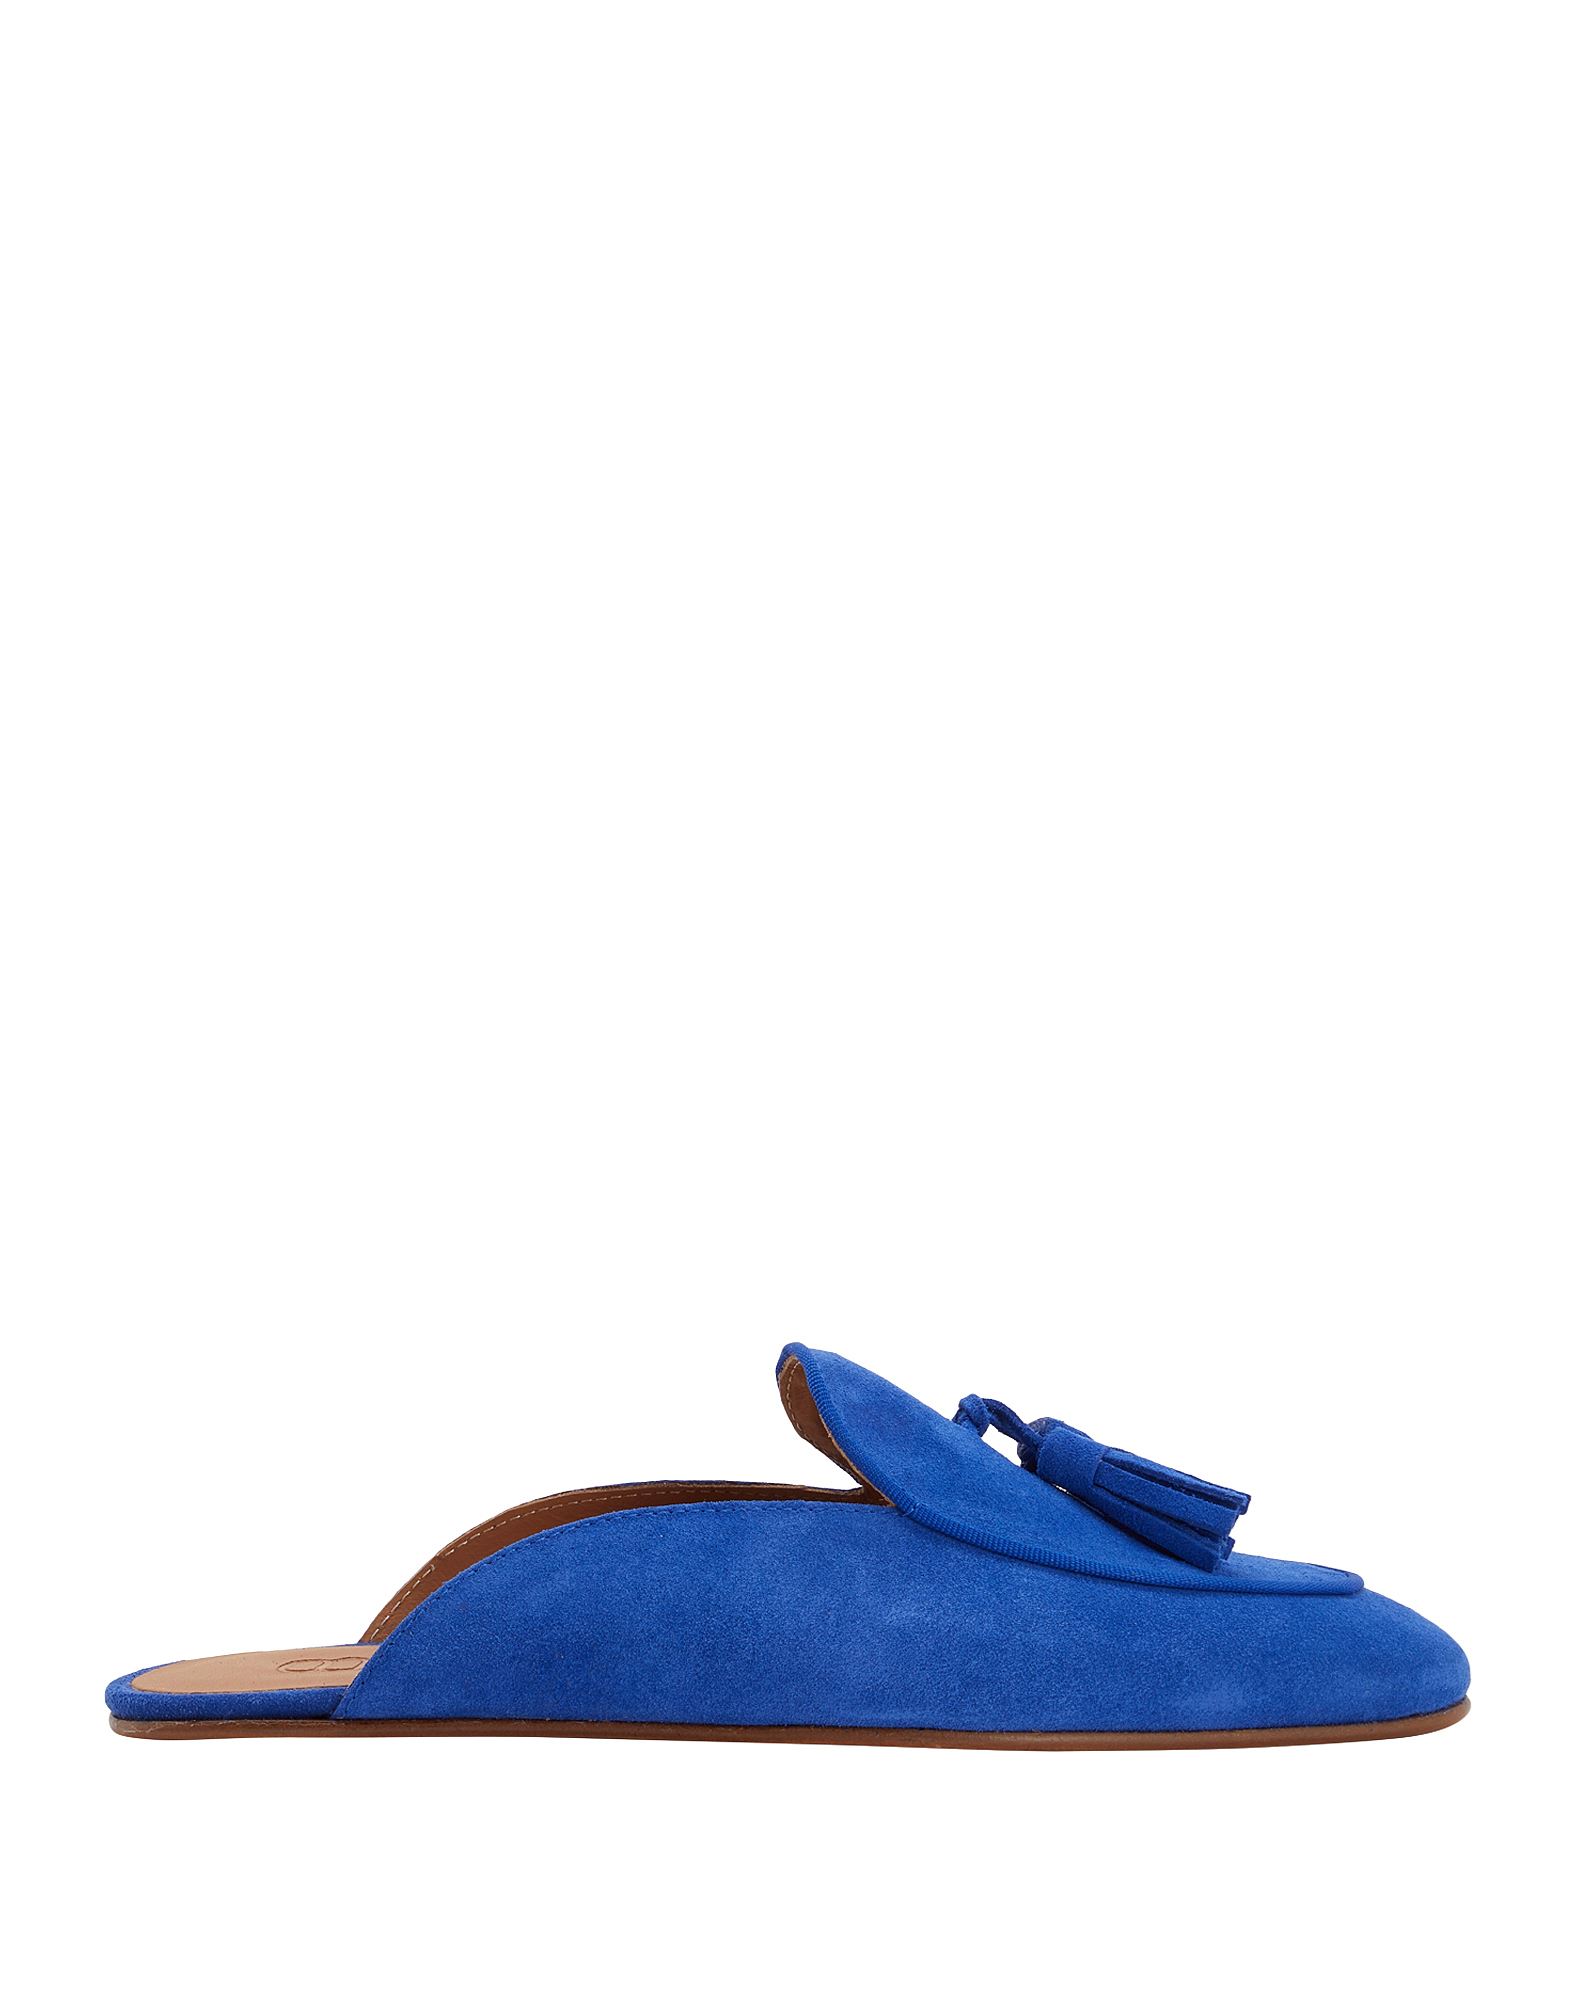 8 By Yoox Suede Leather Tassel Mules Man Mules & Clogs Bright Blue Size 8 Calfskin